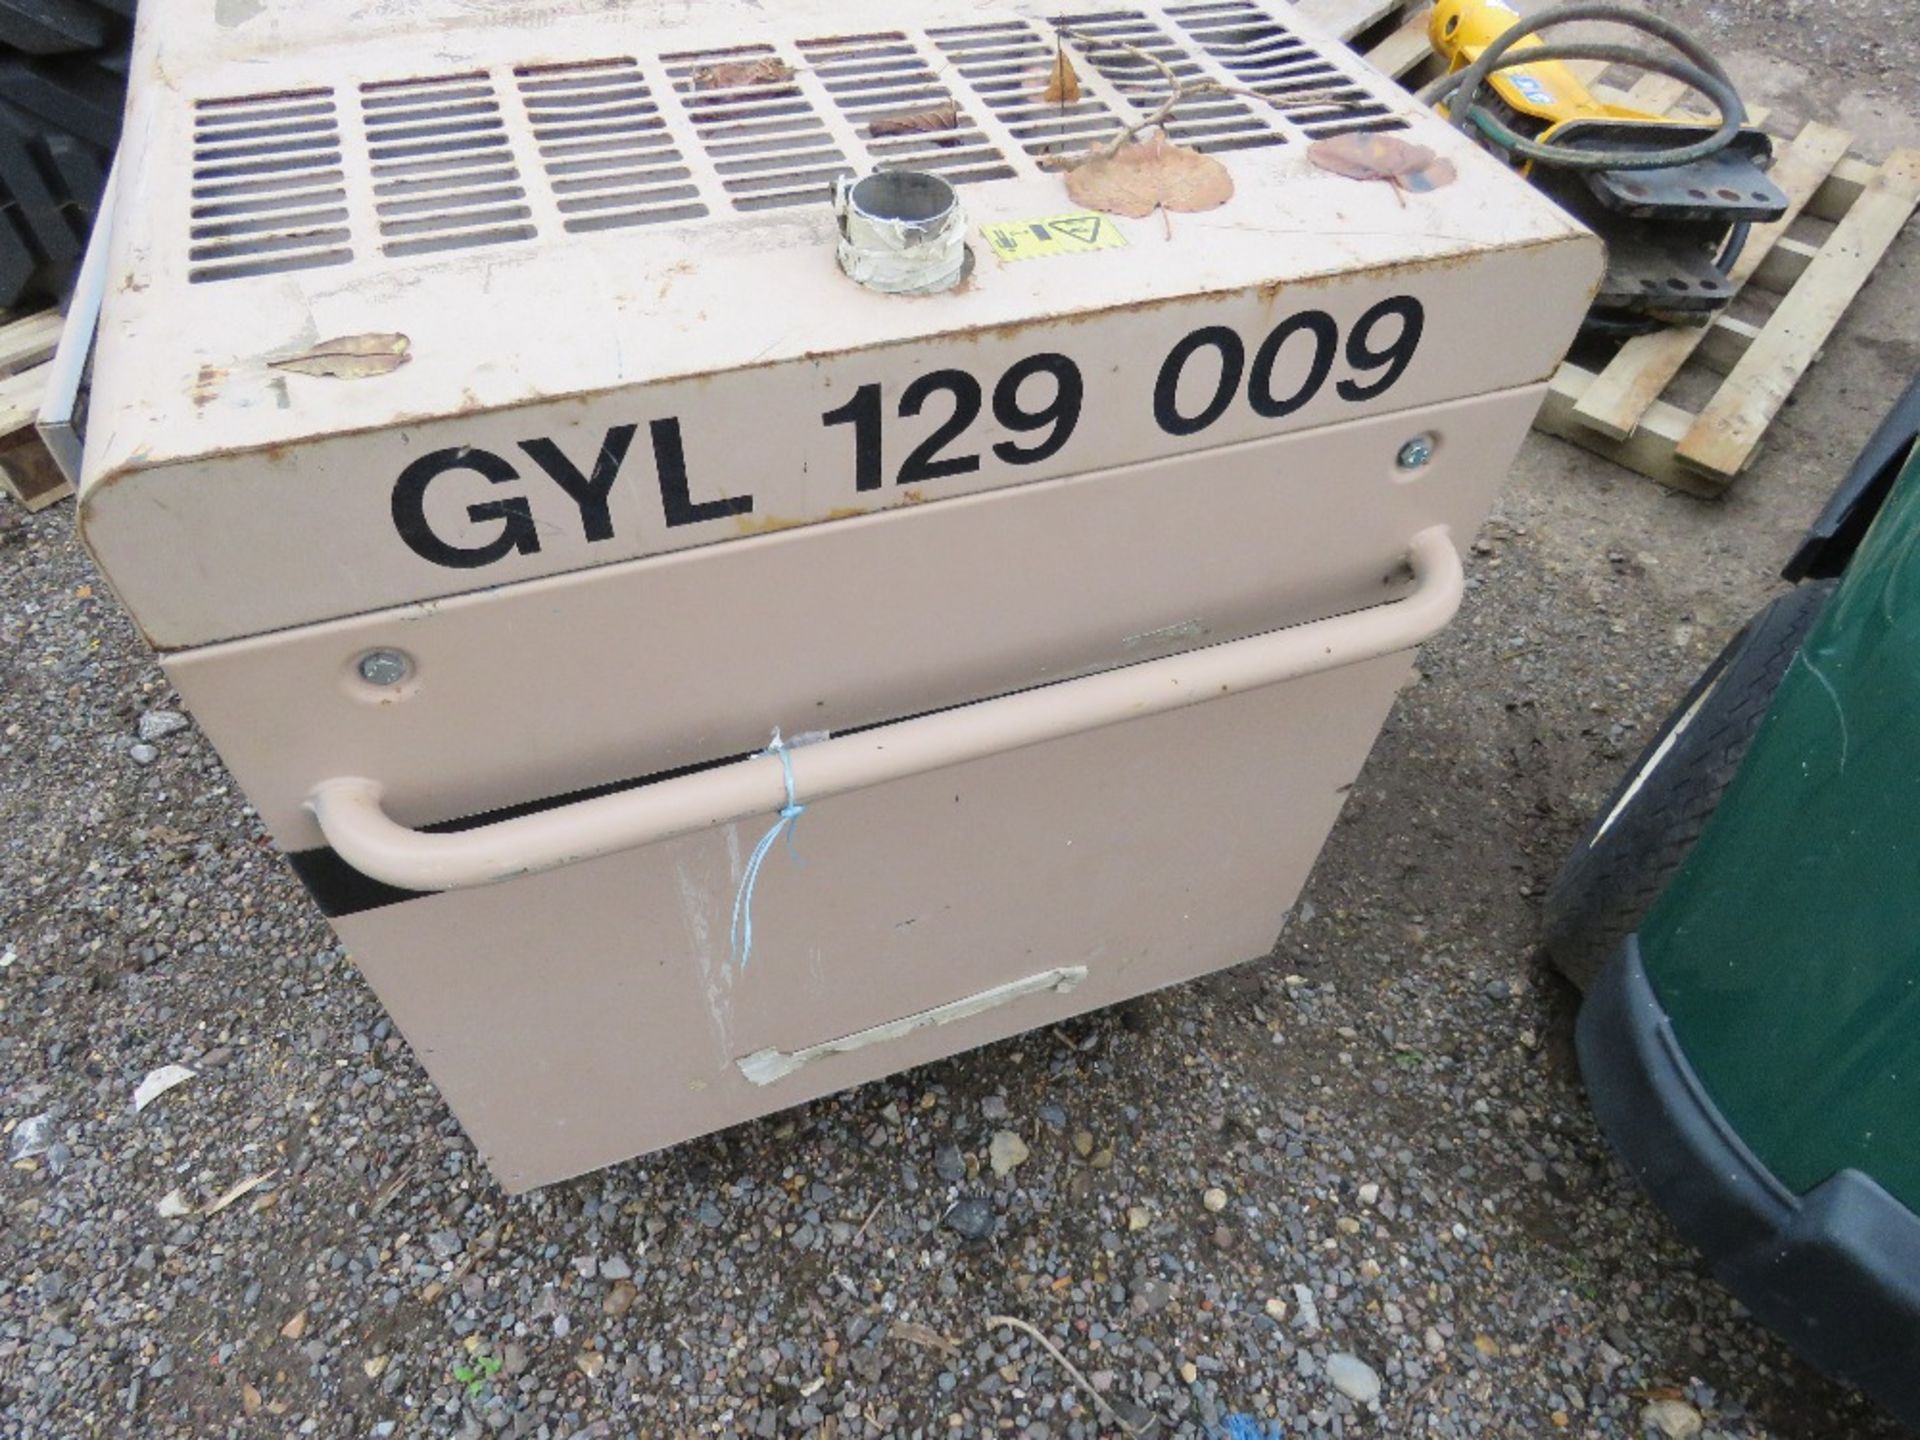 HONDA EX10D WHEELED 10KVA GENERATOR. SPARES/REPAIR AS APPEARS INCOMPLETE, SEE IMAGES. - Image 3 of 5